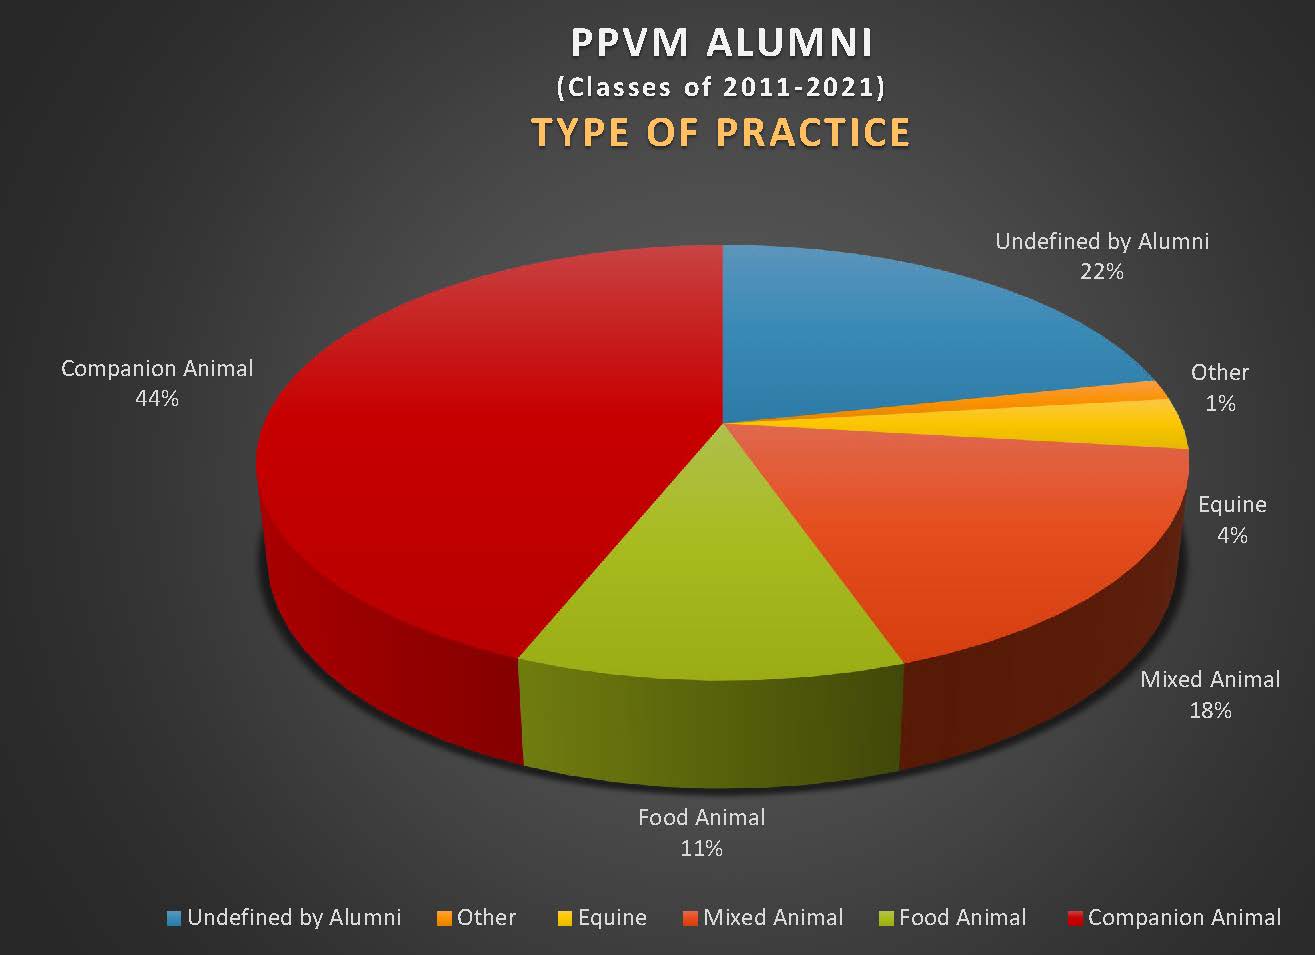 Pie chart showing distribution of practice for PPVM Alumni